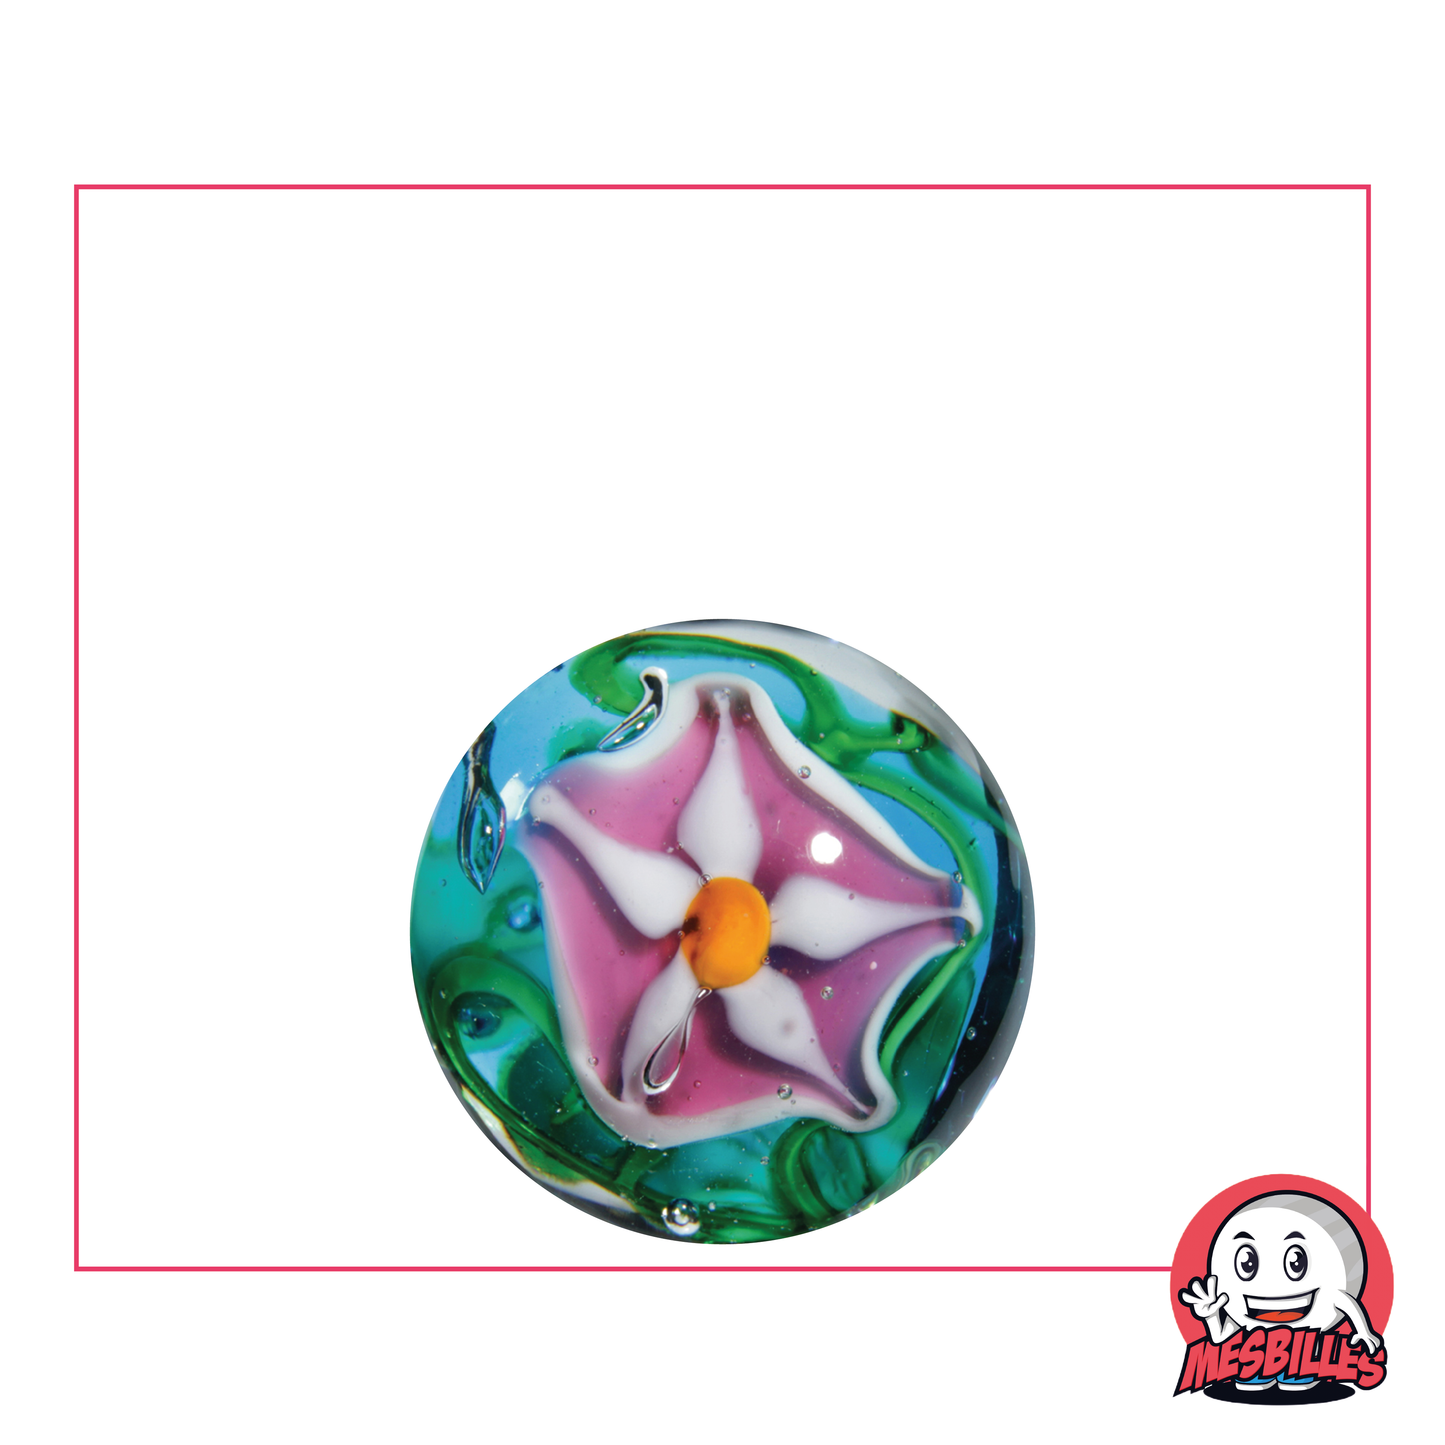 1 Starry Art Marble 22 mm